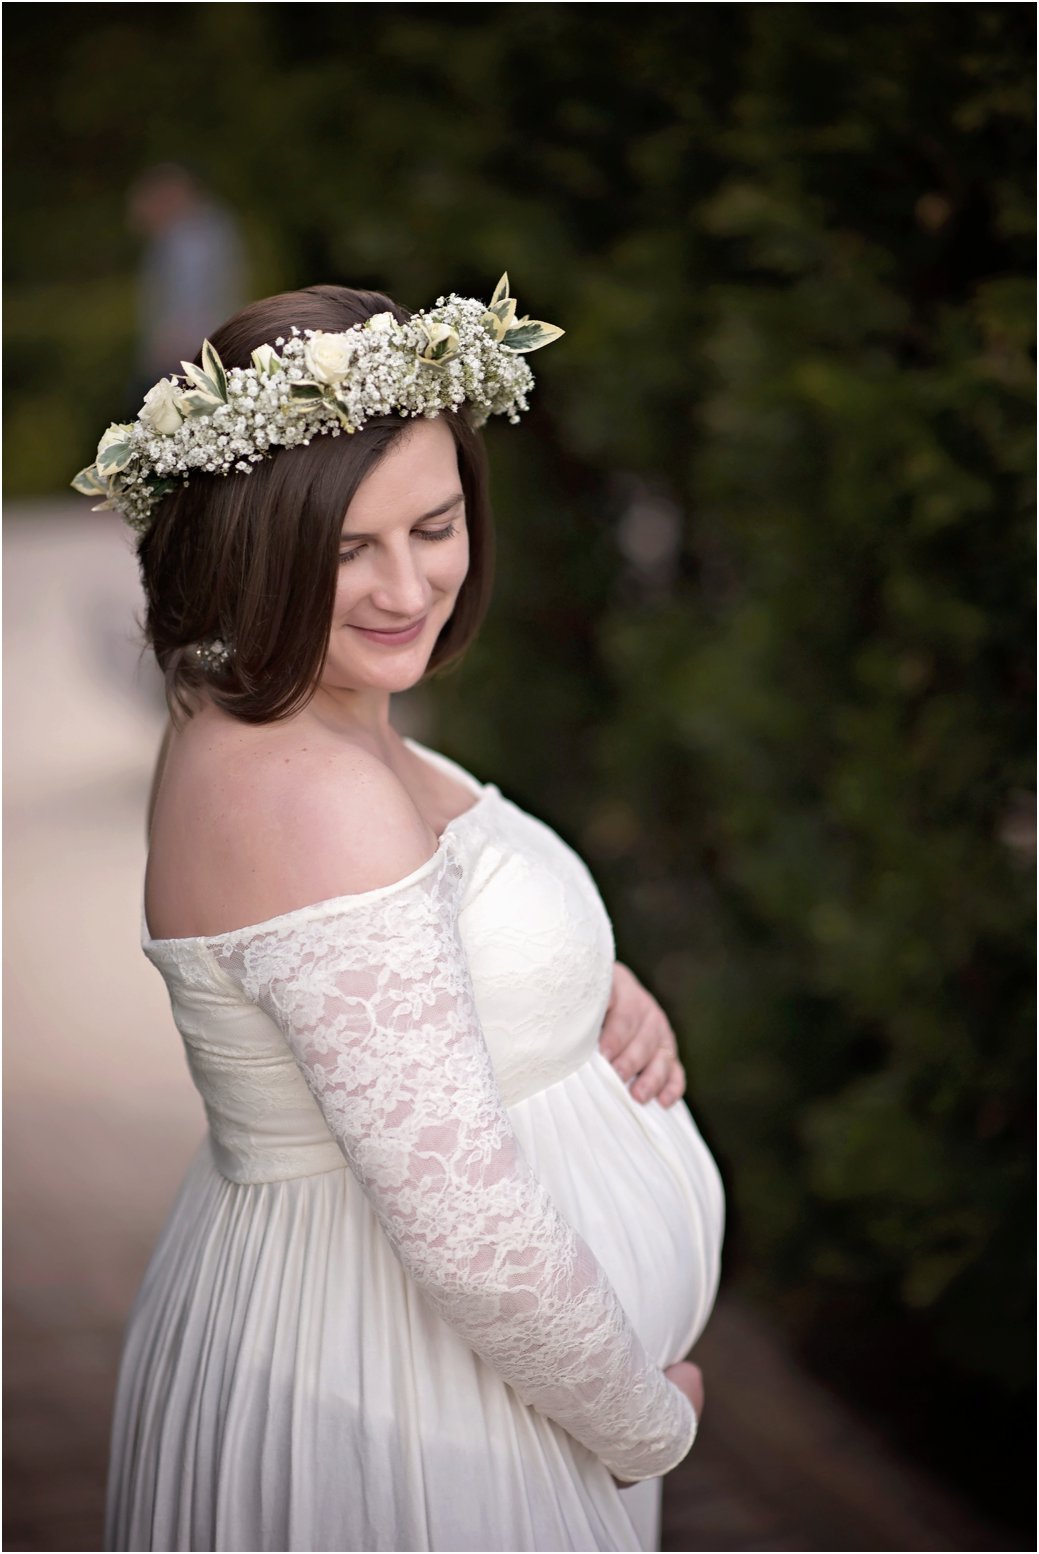 Maggie Daley Park white lace maternity dress maternity session floral crown Chicago IL